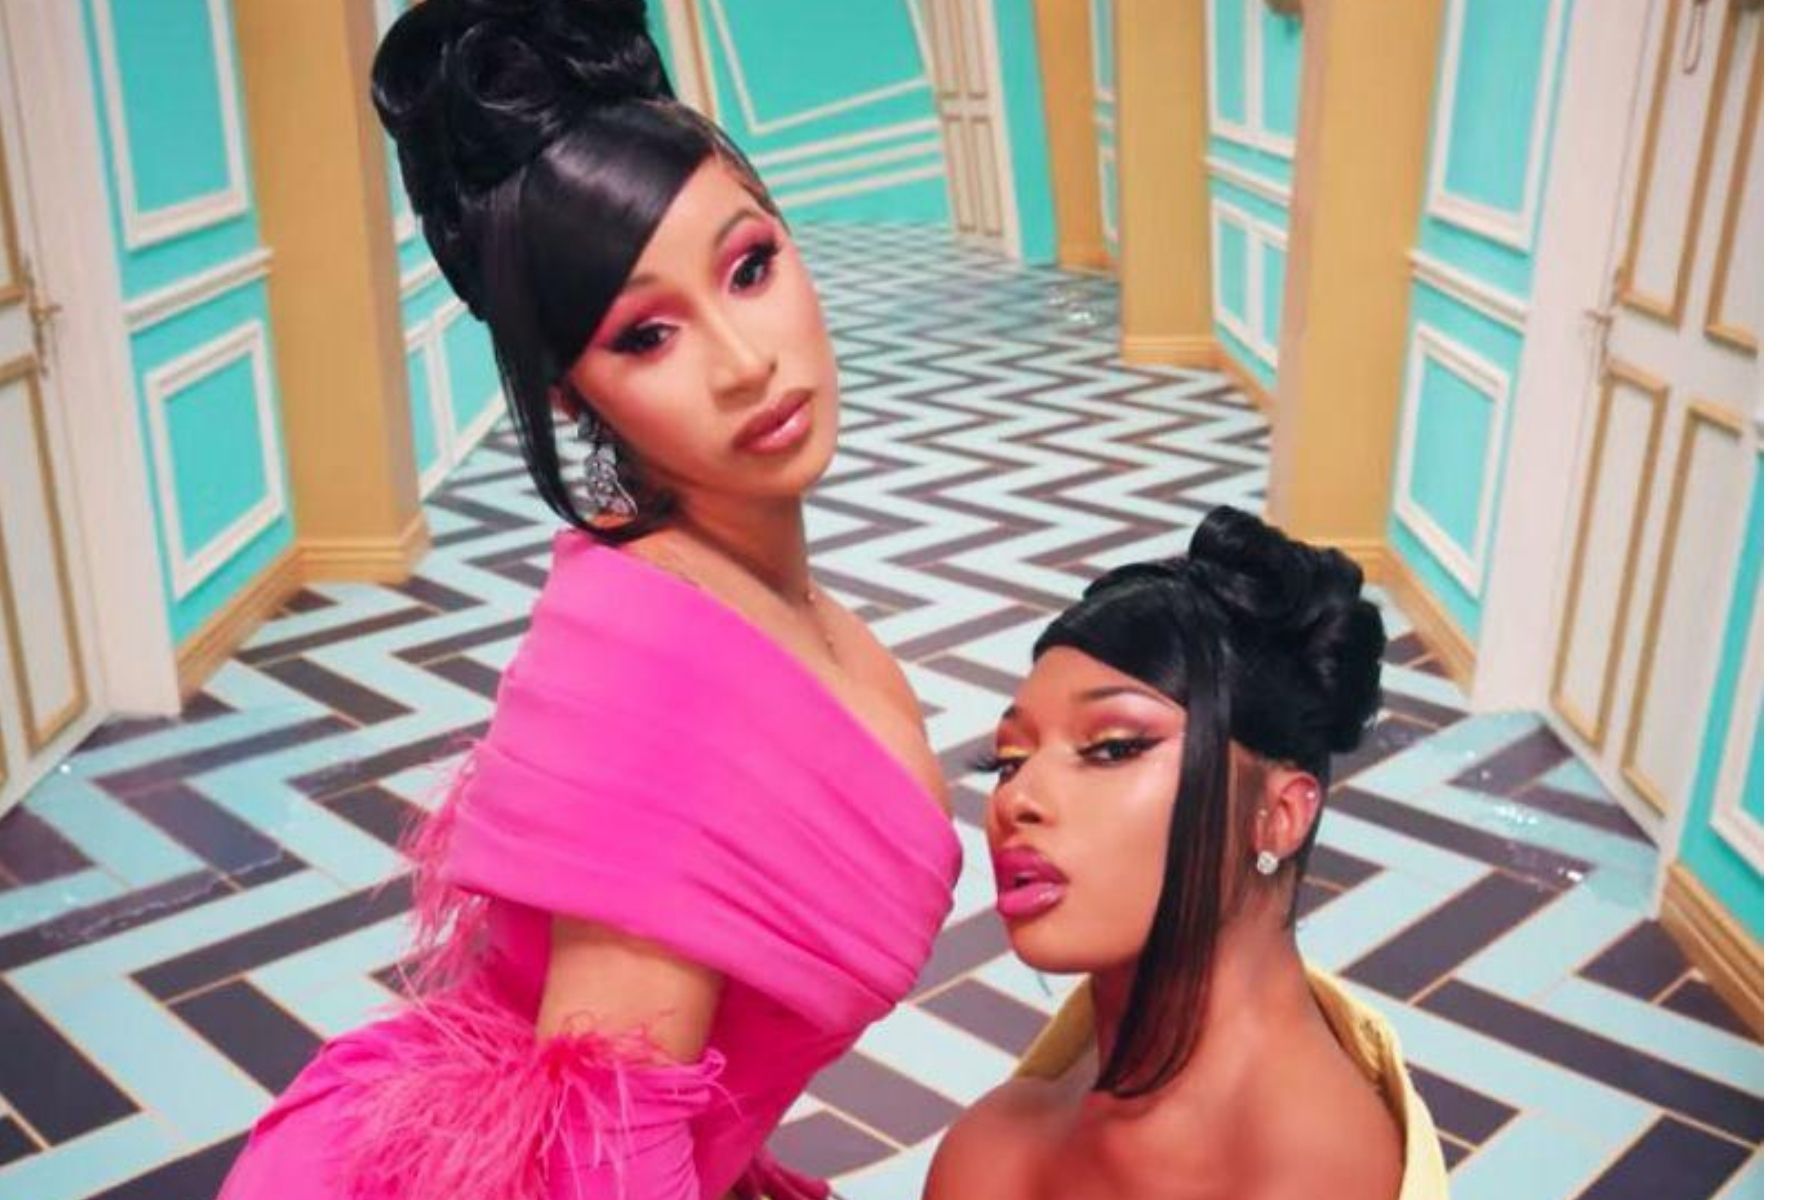 Cardi B Says Little Mix Song Was Given to Her Before Nicki Minaj - XXL